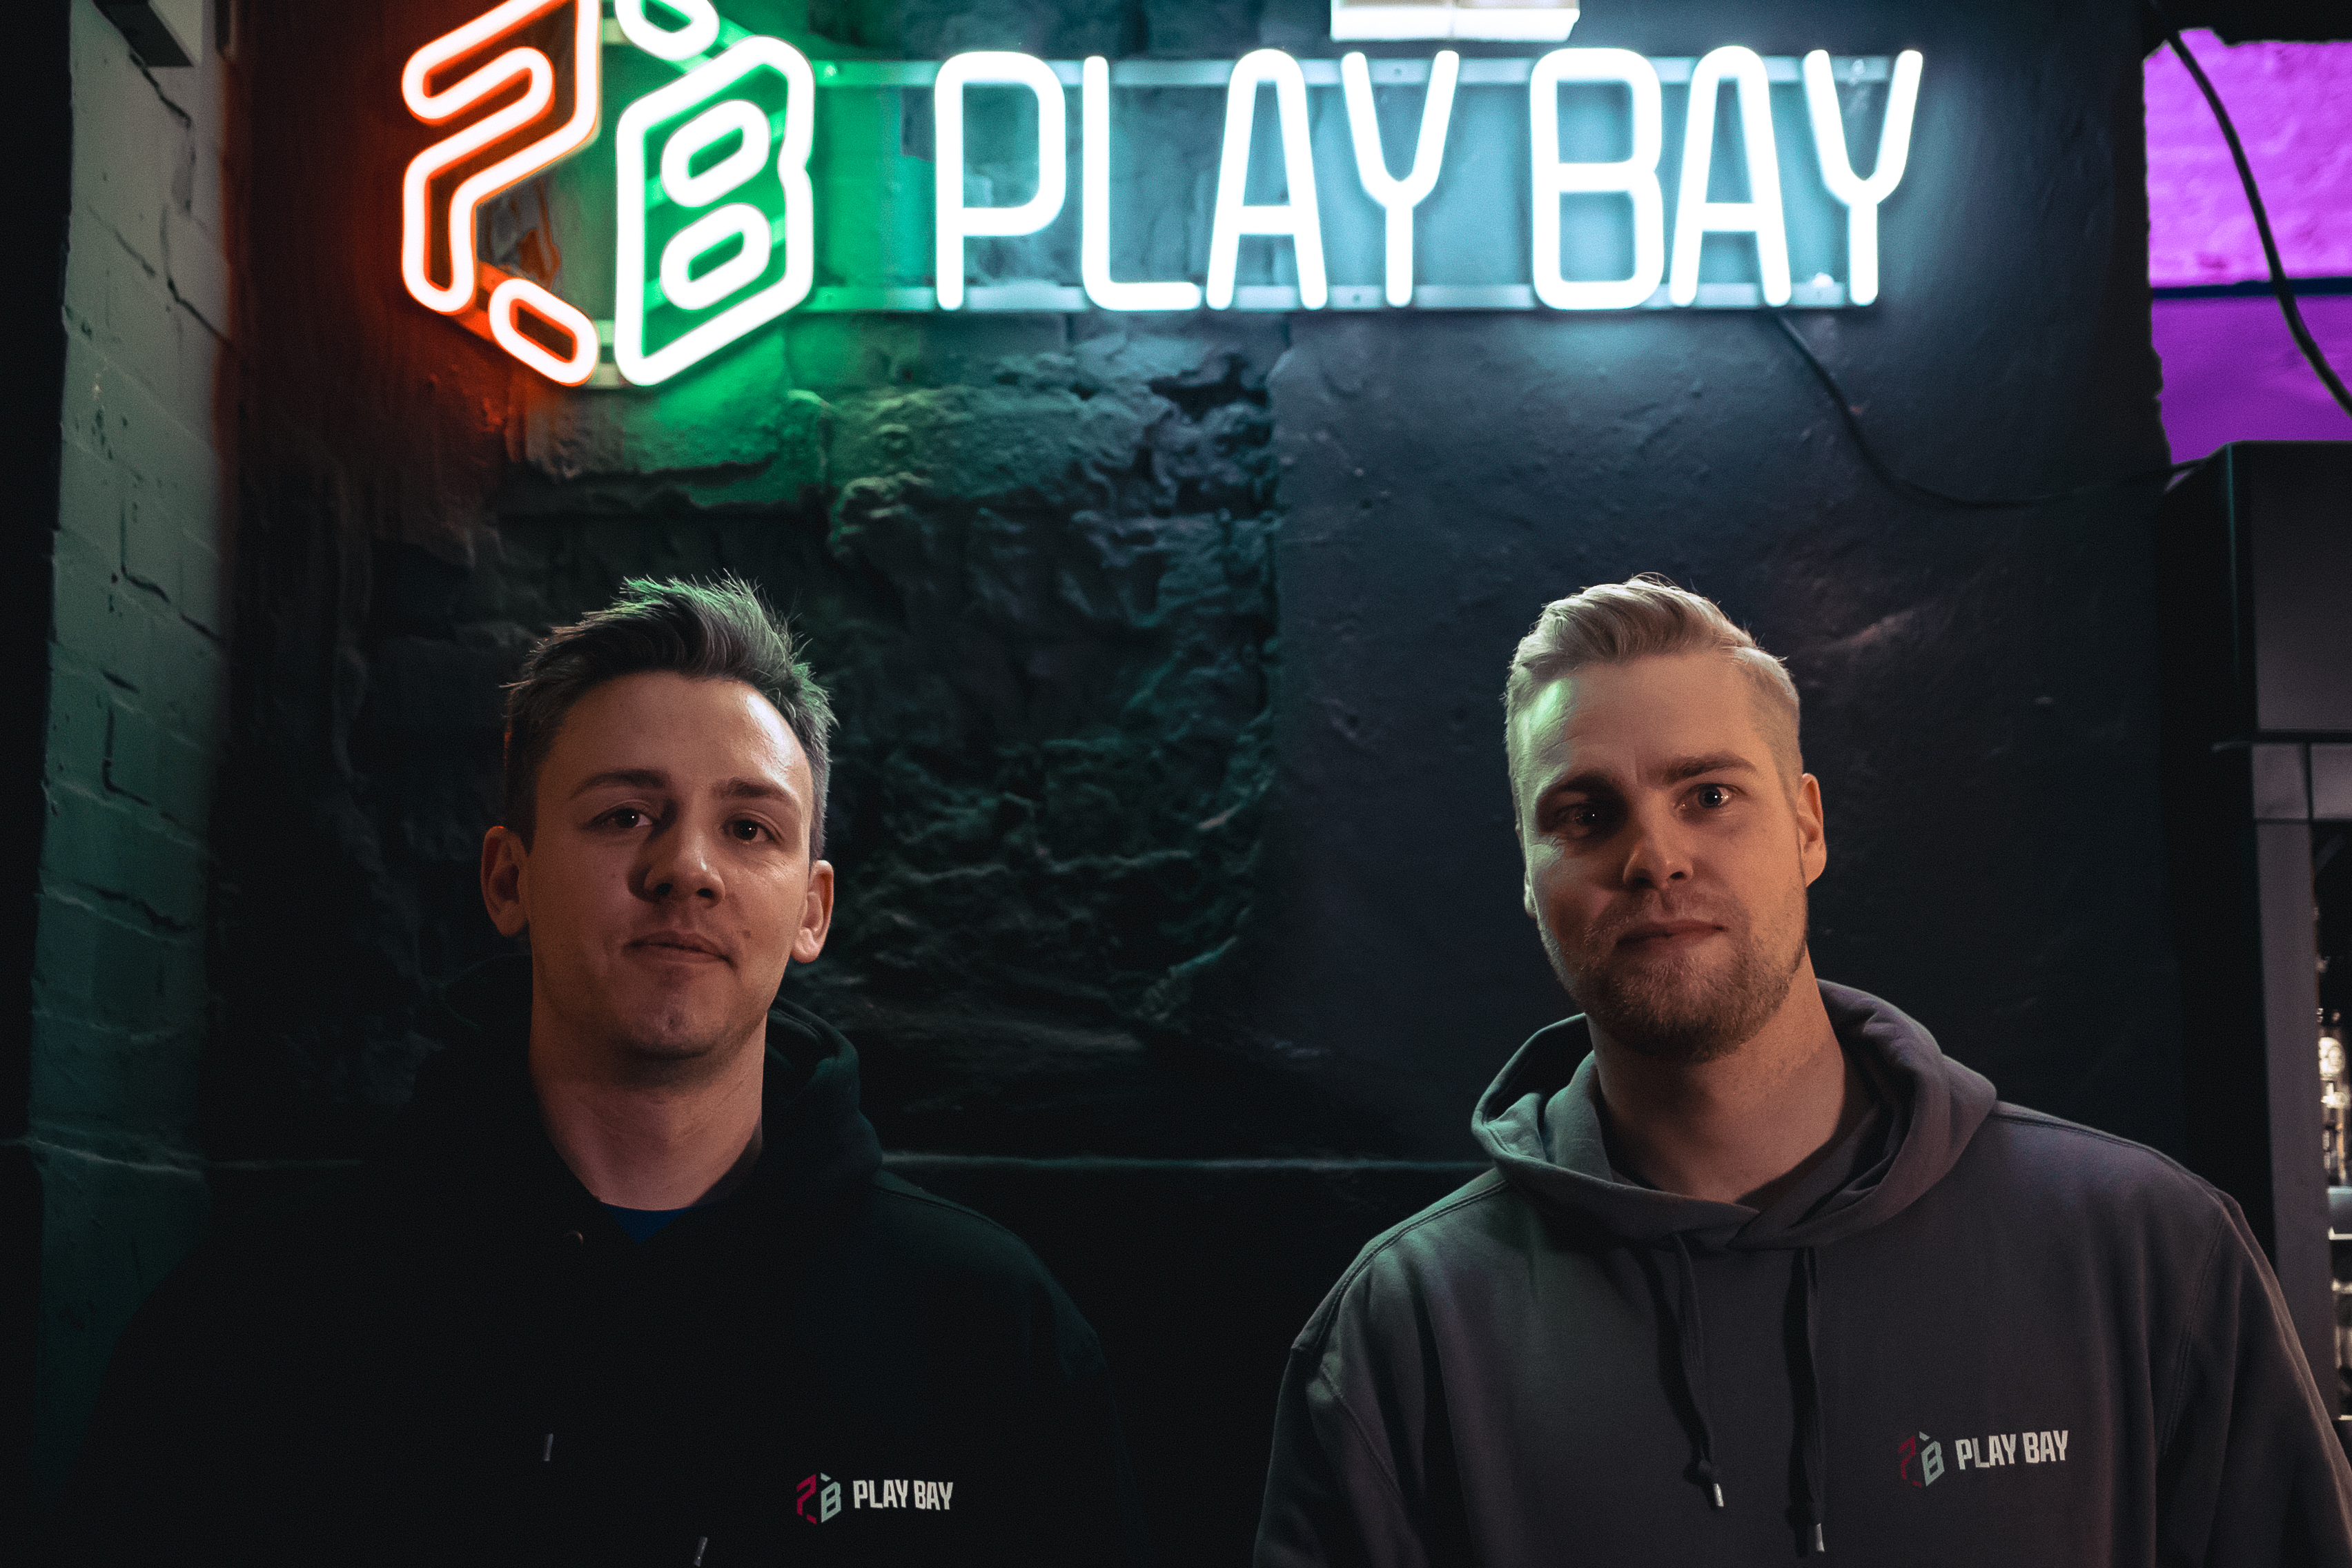 Patrick Bauer and Laurens Ahlring, Co-Founders of Play Bay